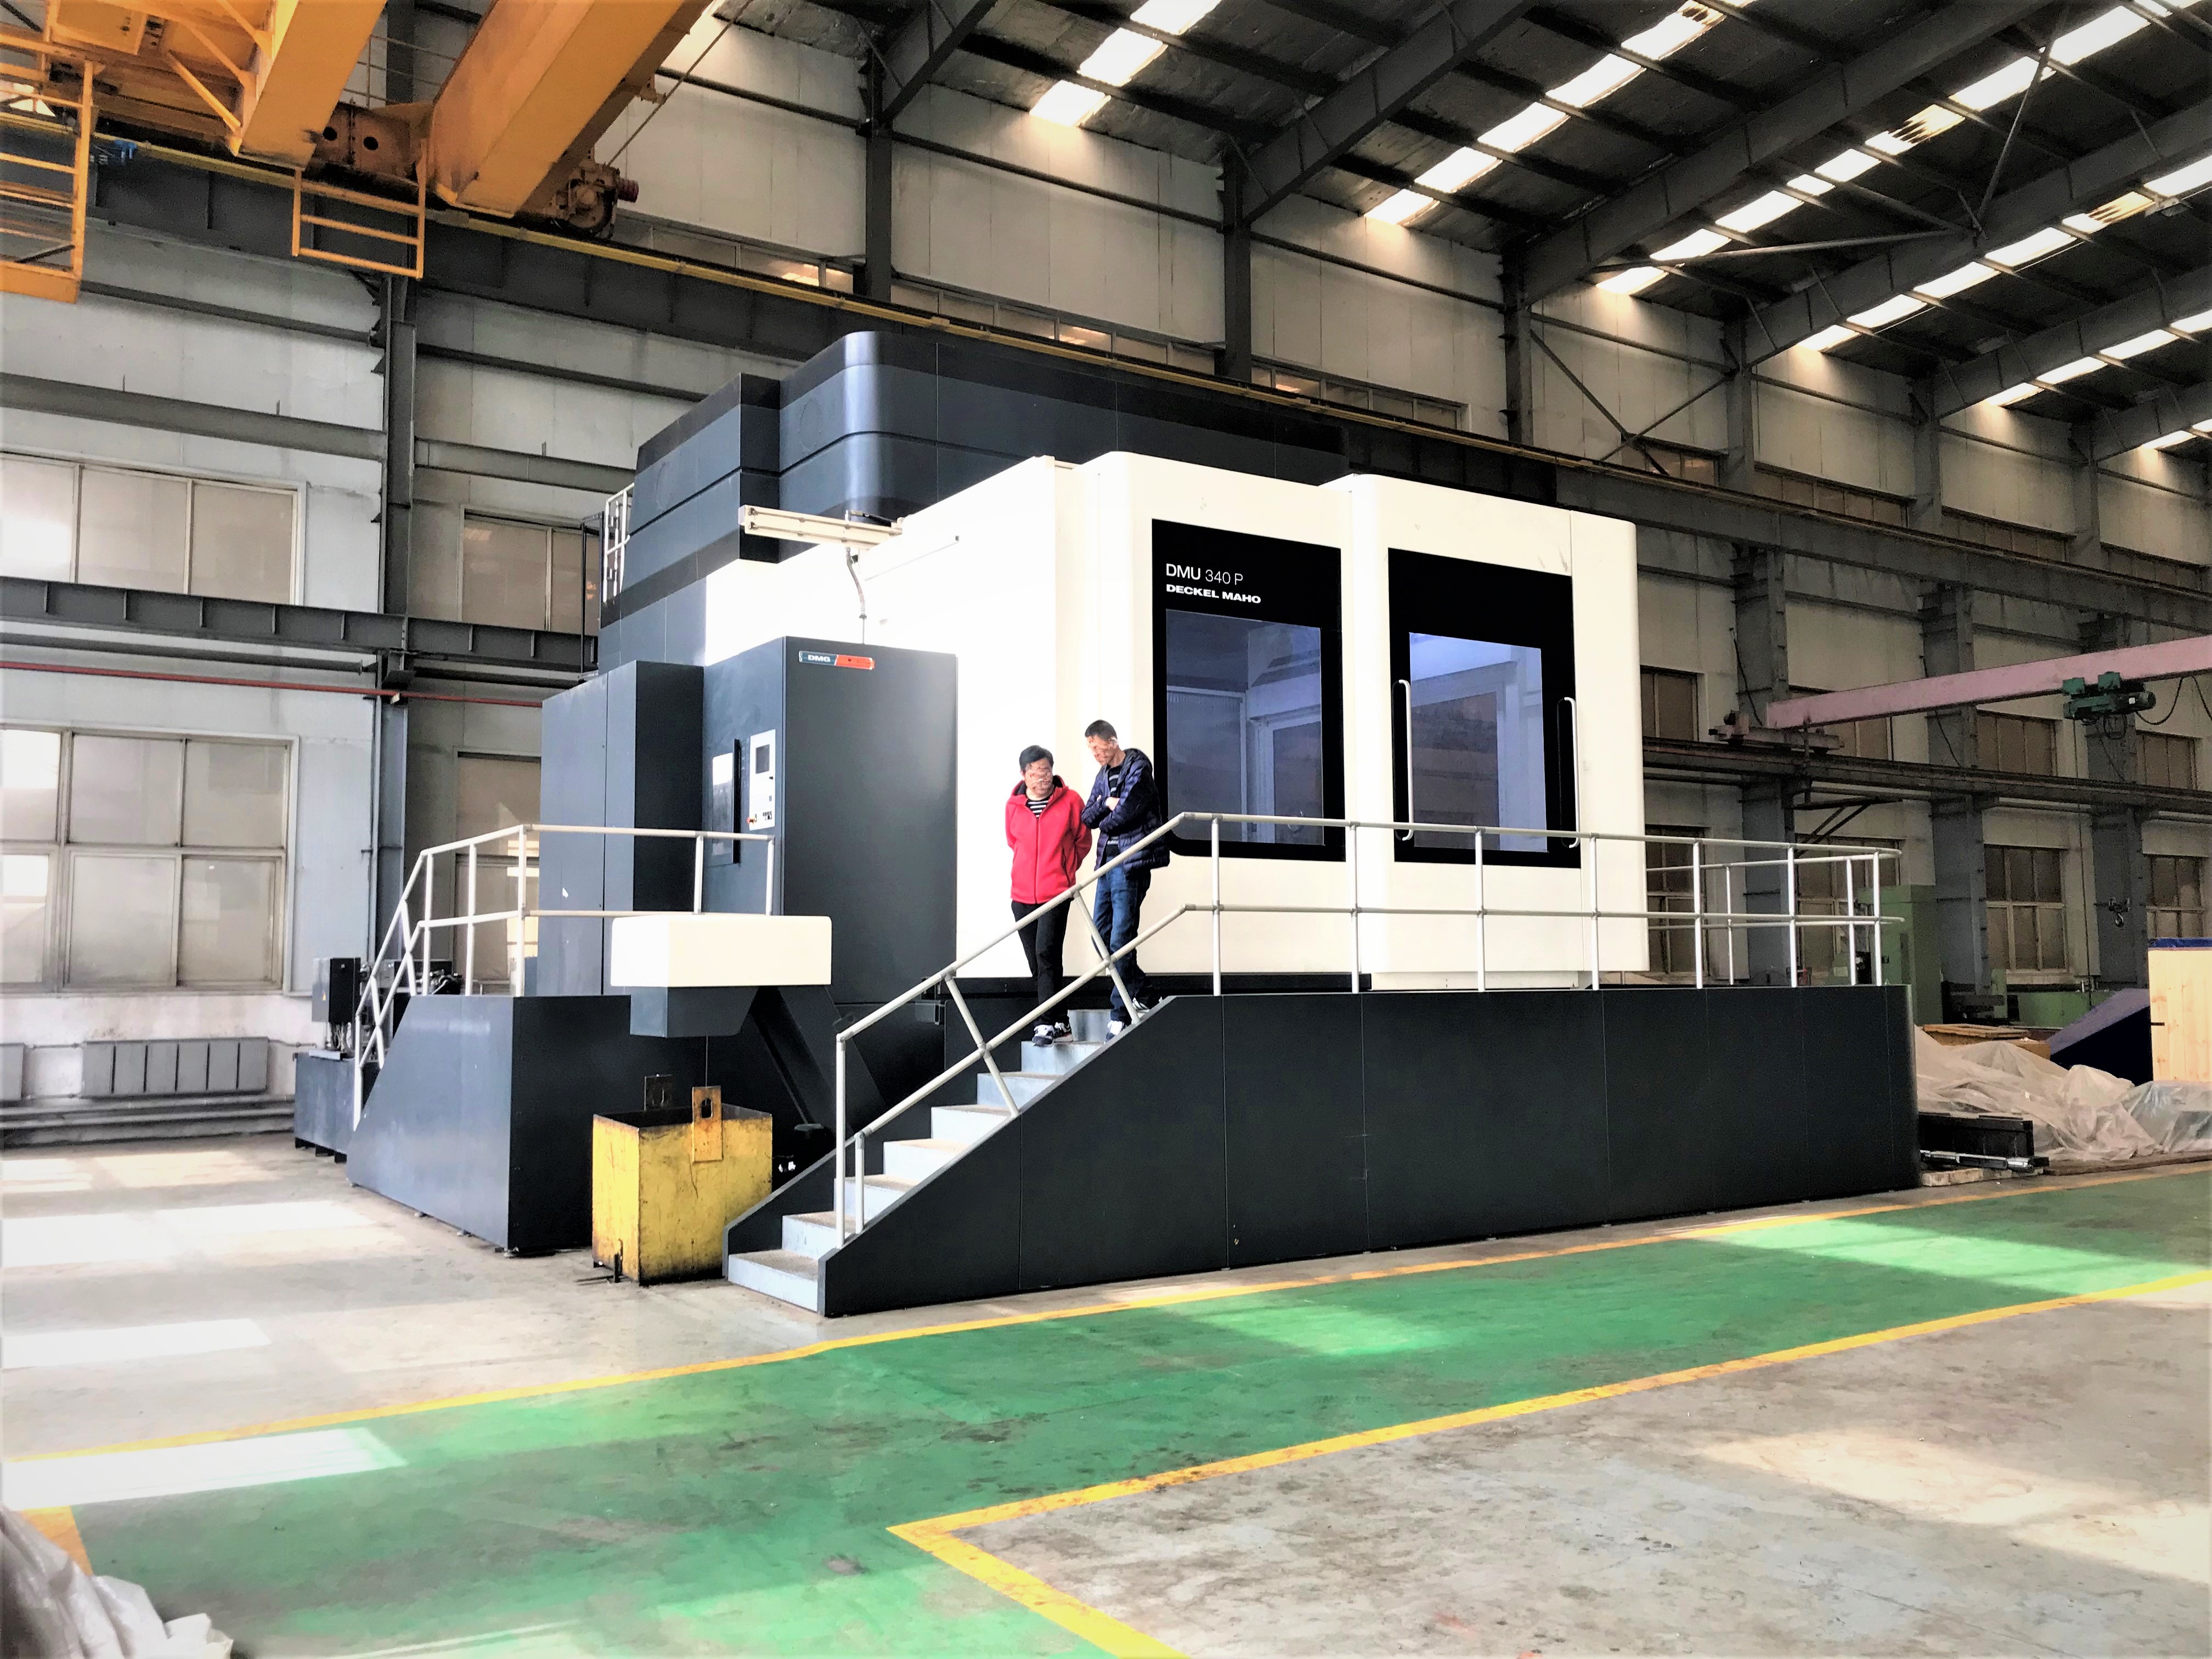 Used DMG DMU 340P 5-Axis Milling Machine | Asset-Trade